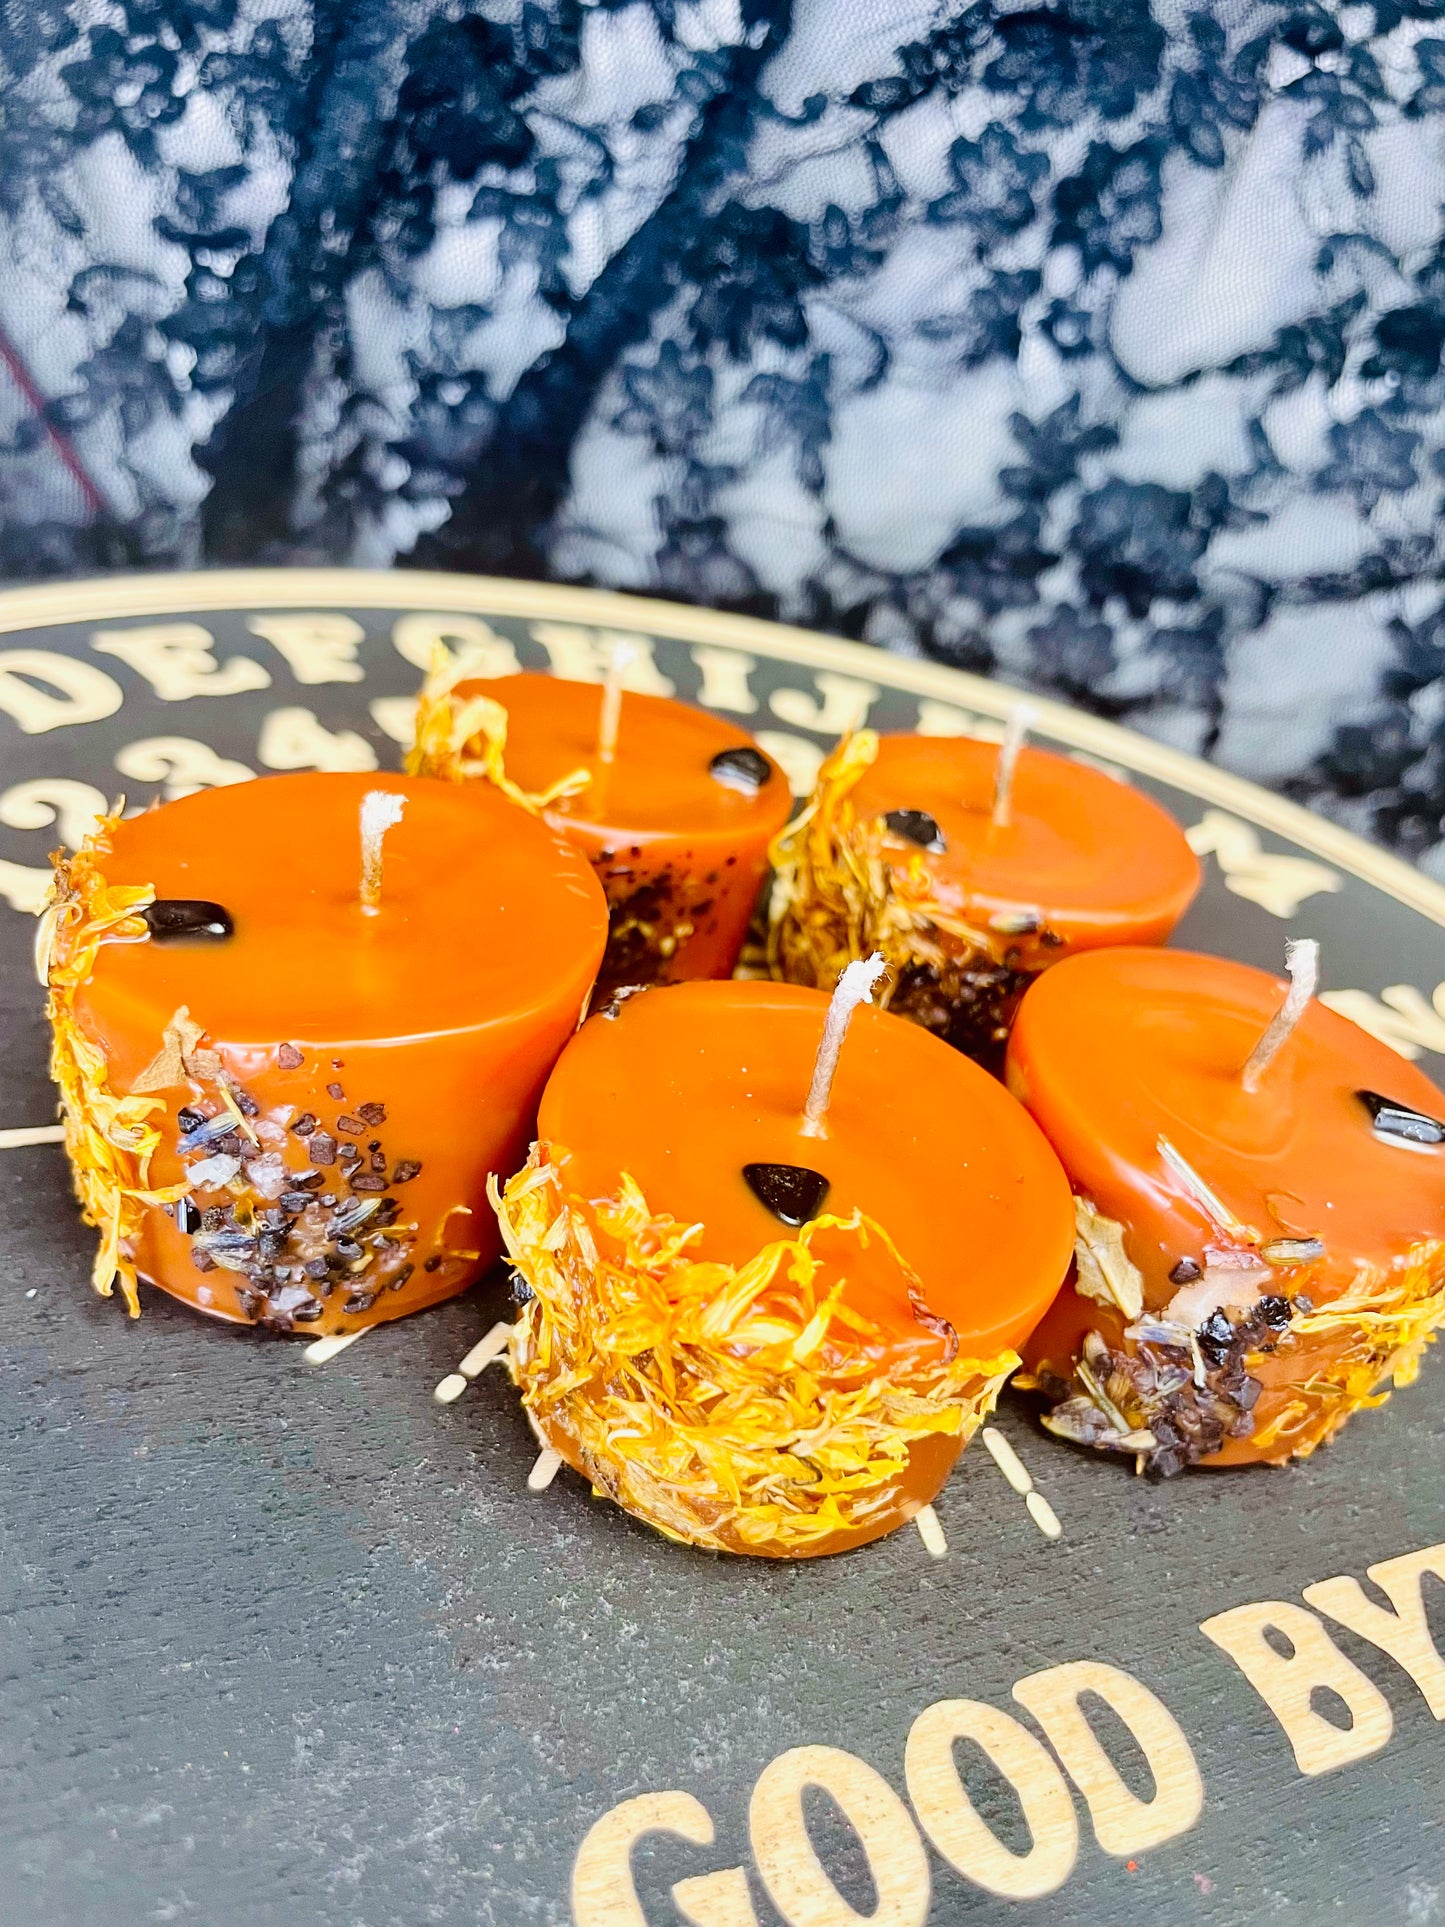 Samhain Ritual Spell Candle, Pumpkin Scented, Beeswax